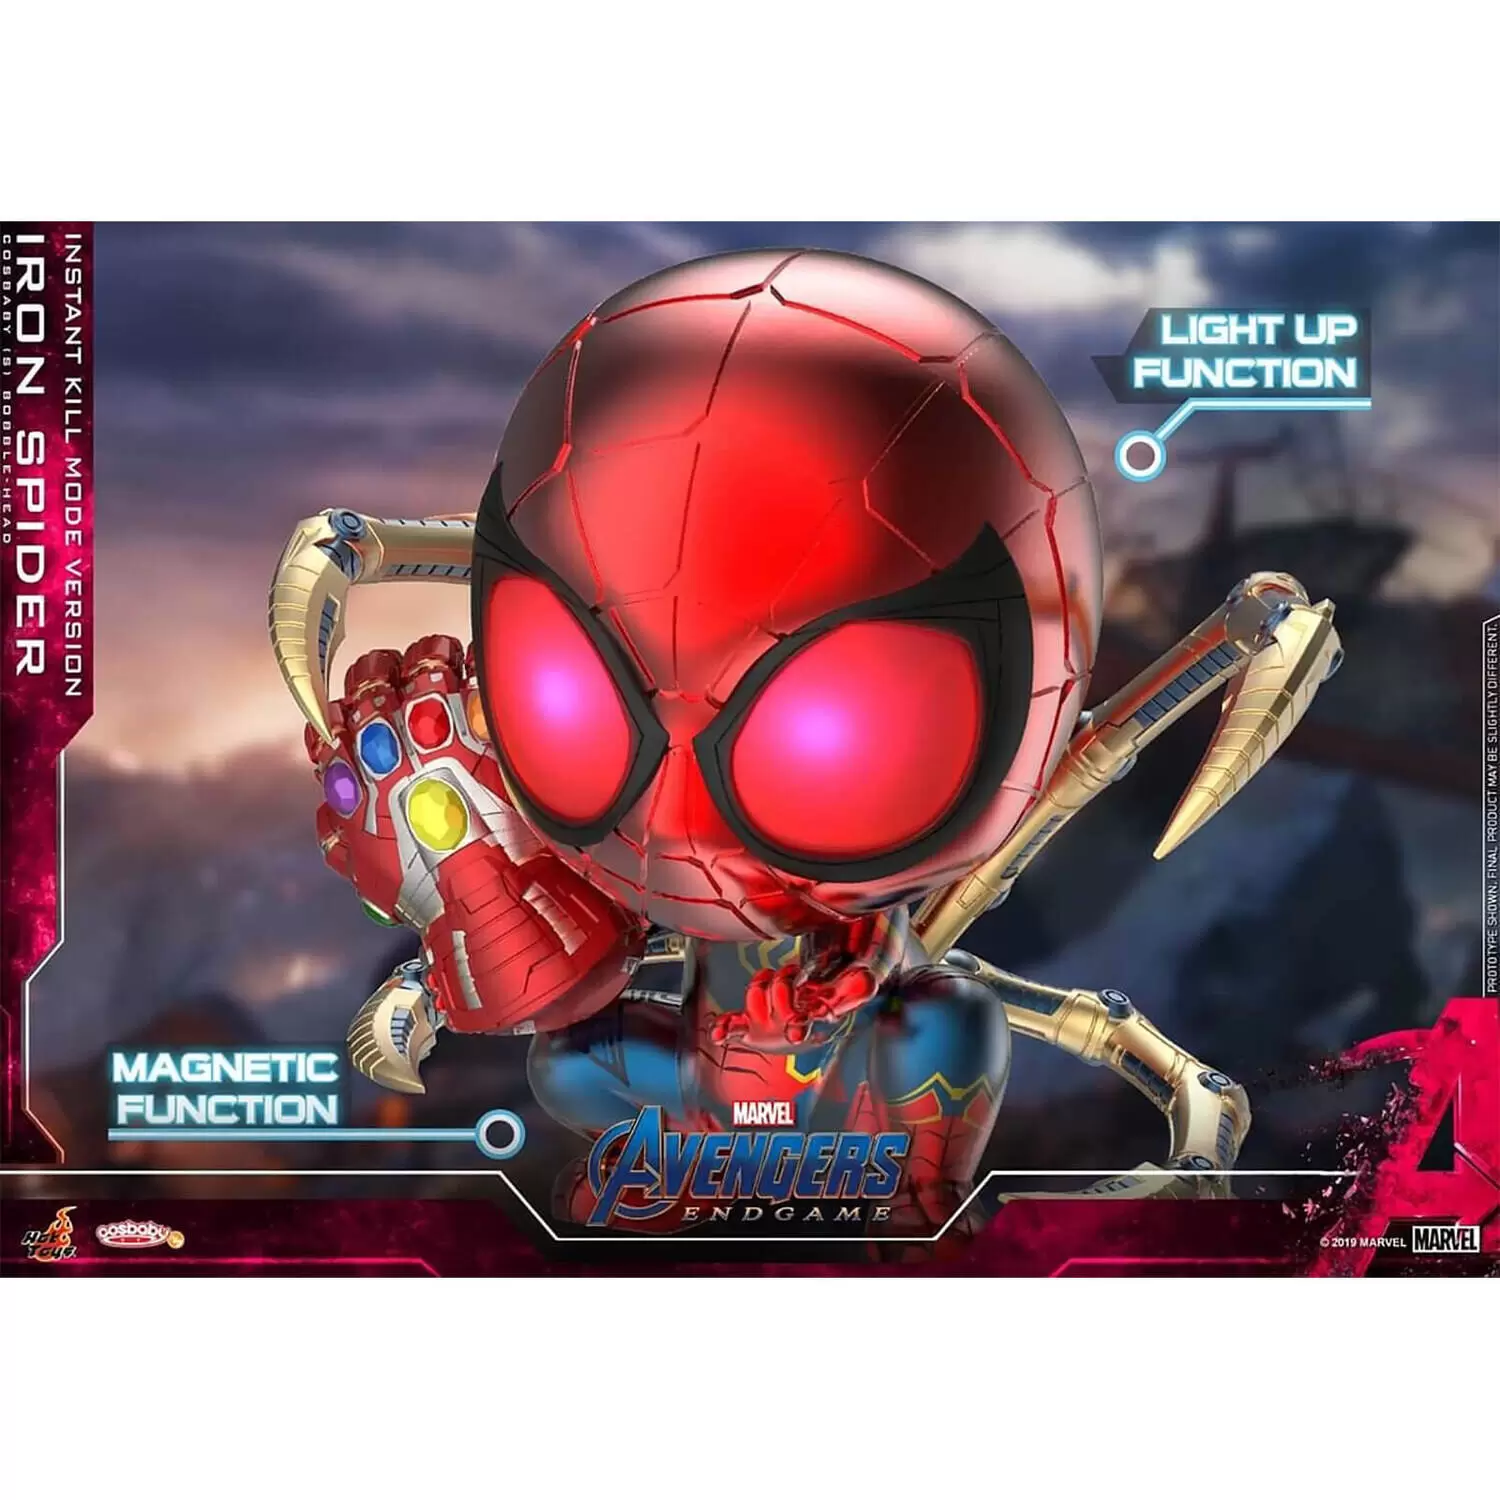 Cosbaby Figures - Avengers: Endgame - Iron Spider (Instant Kill Mode Version)